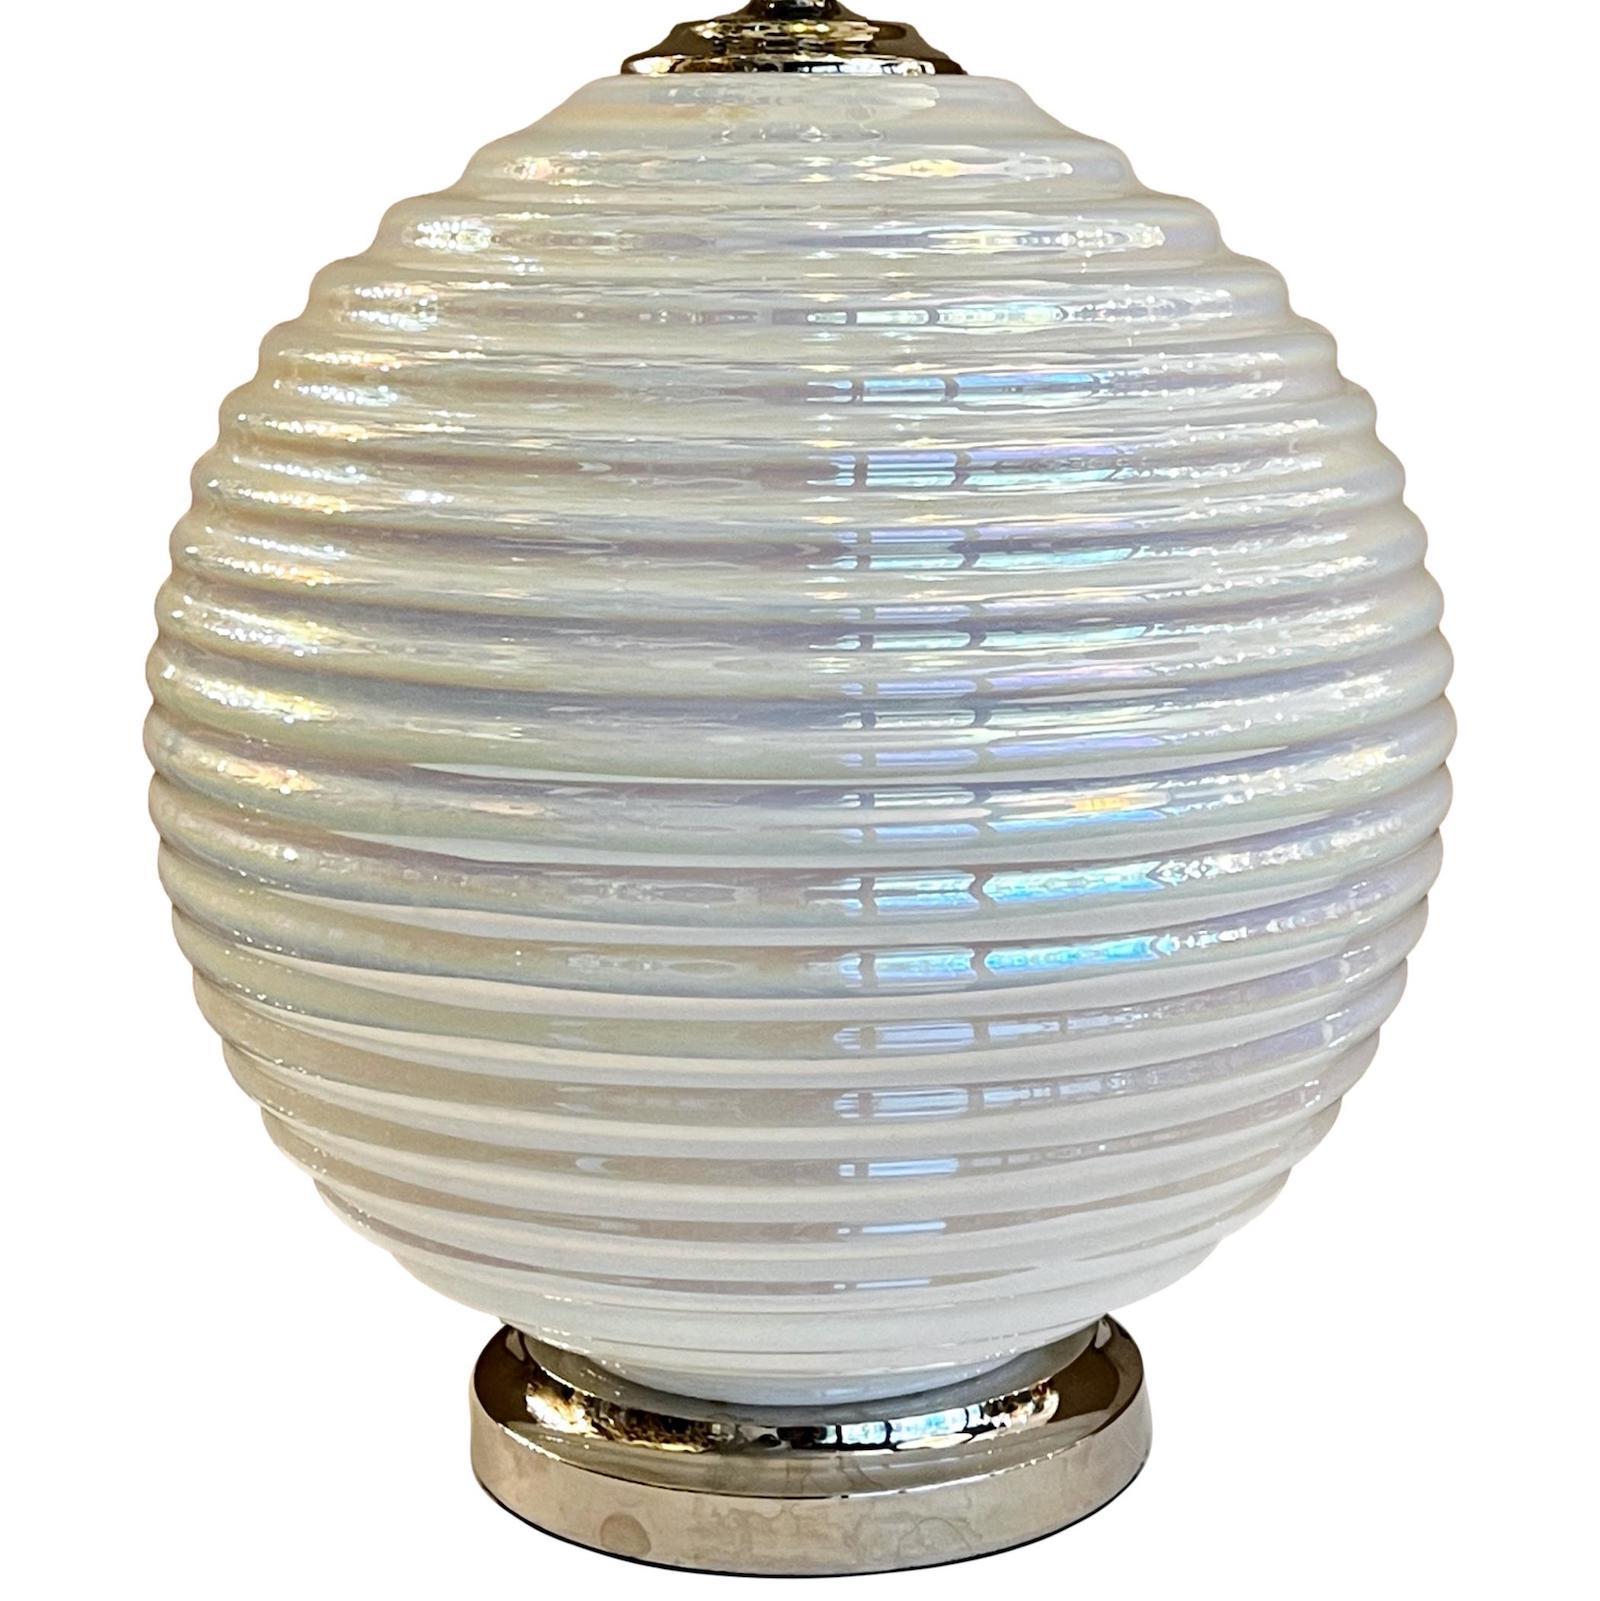 A circa 1960's French molded white pearl-toned iridescent glass table lamp with silver base.

Measurements:
Height of body: 18